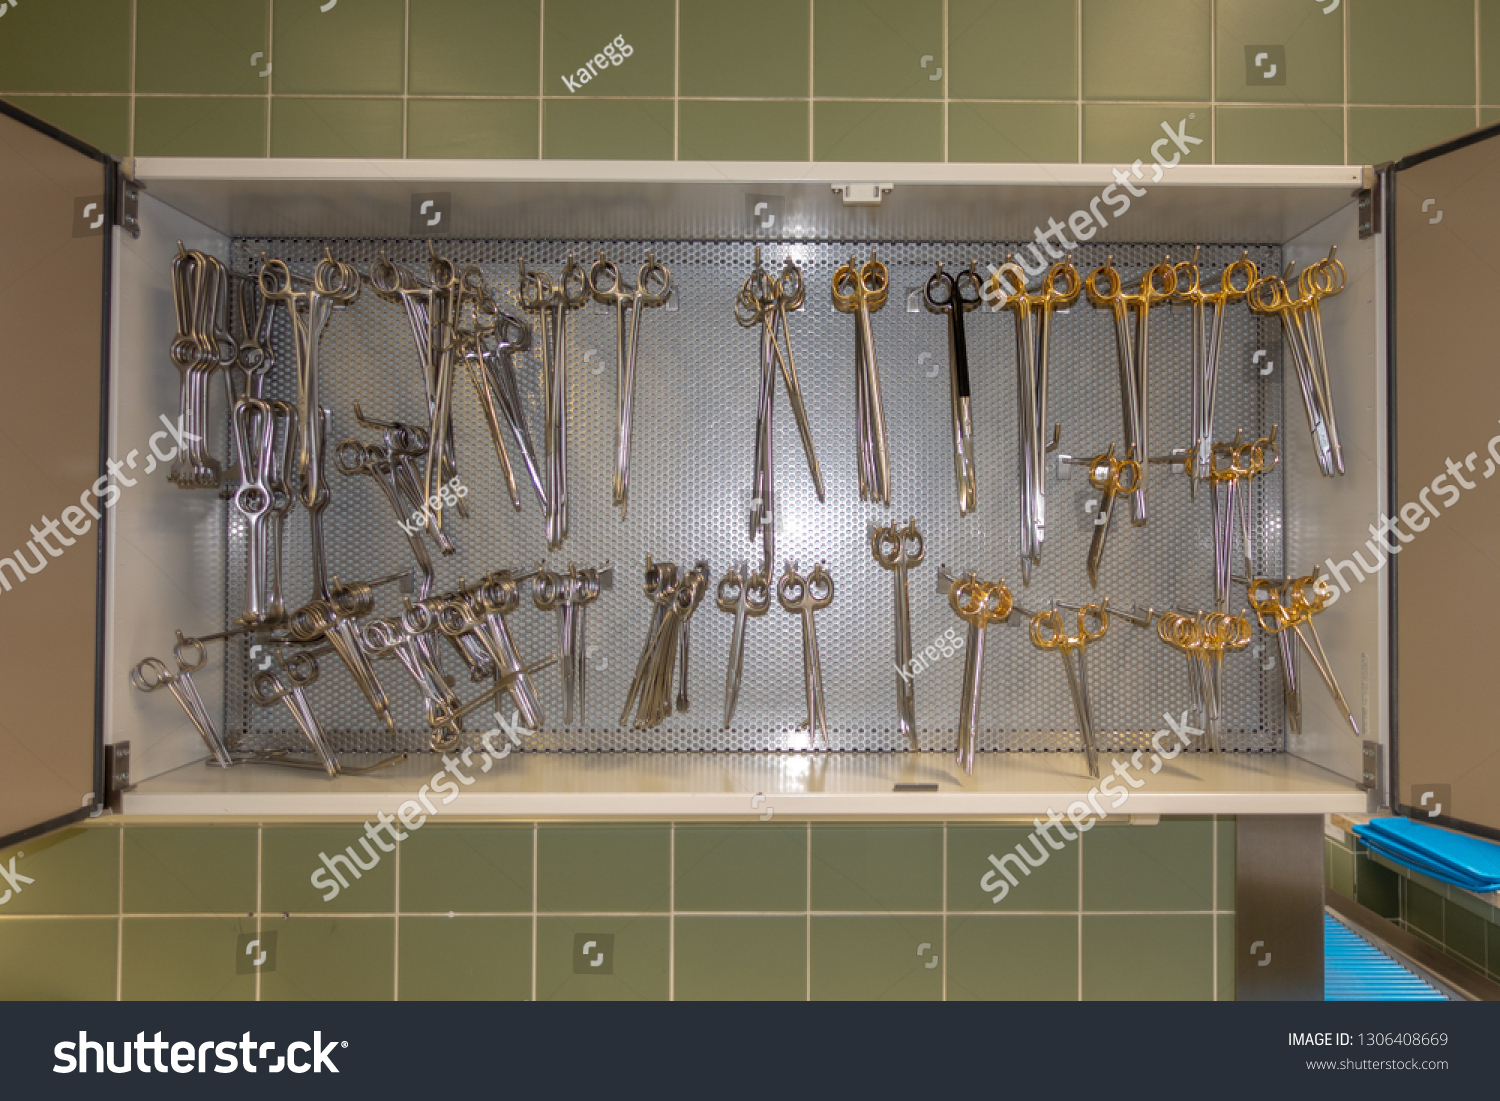 surgery instruments in reprocessing #1306408669